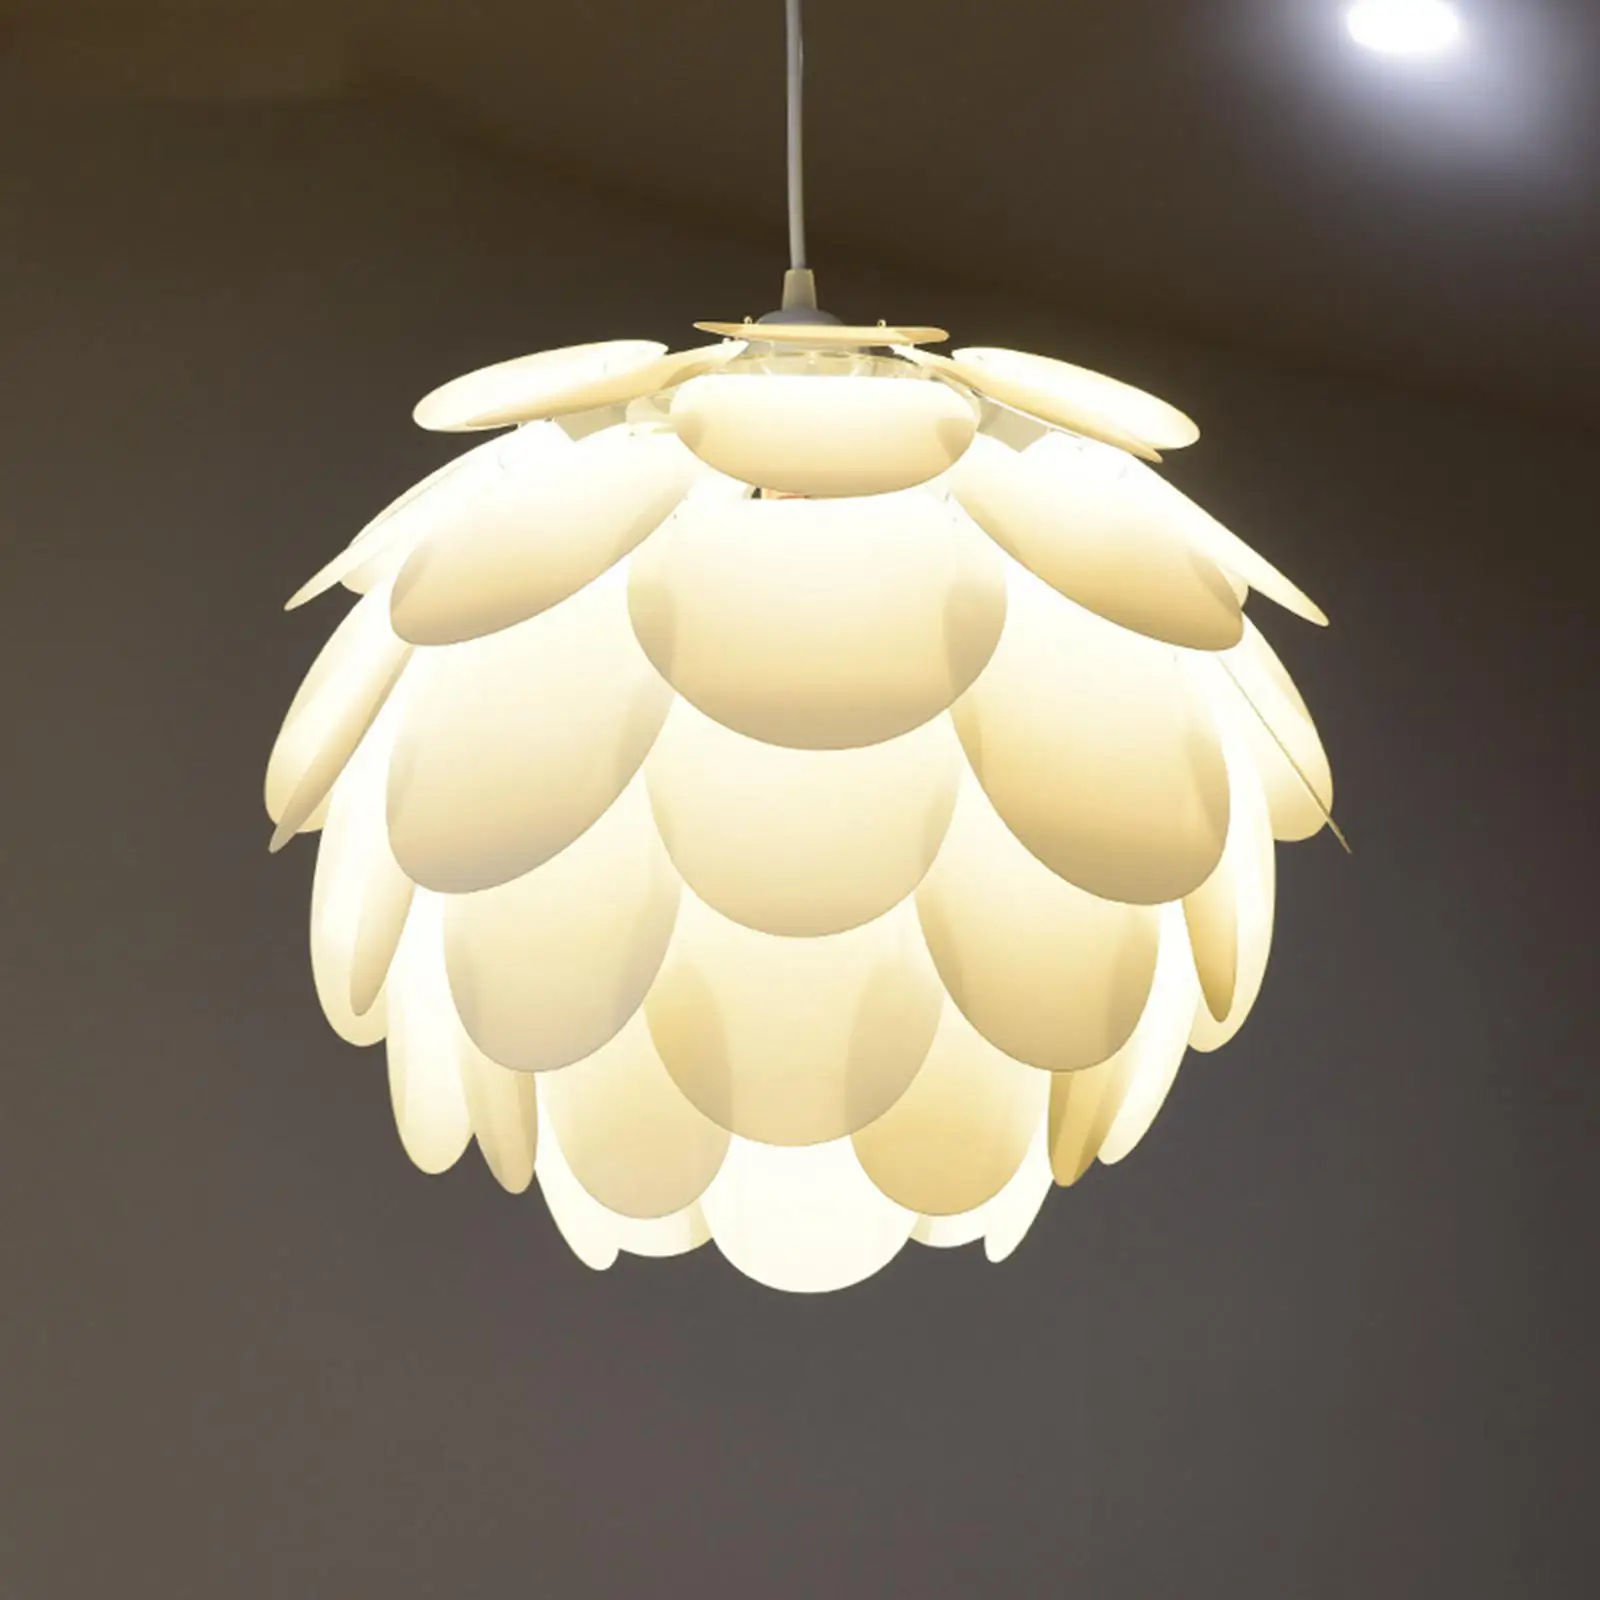 Creative Lampshade Light Fixture Cover Ceiling Light Shade Simple for Kitchen Island Library Bedroom Home Bar Cafe Decoration